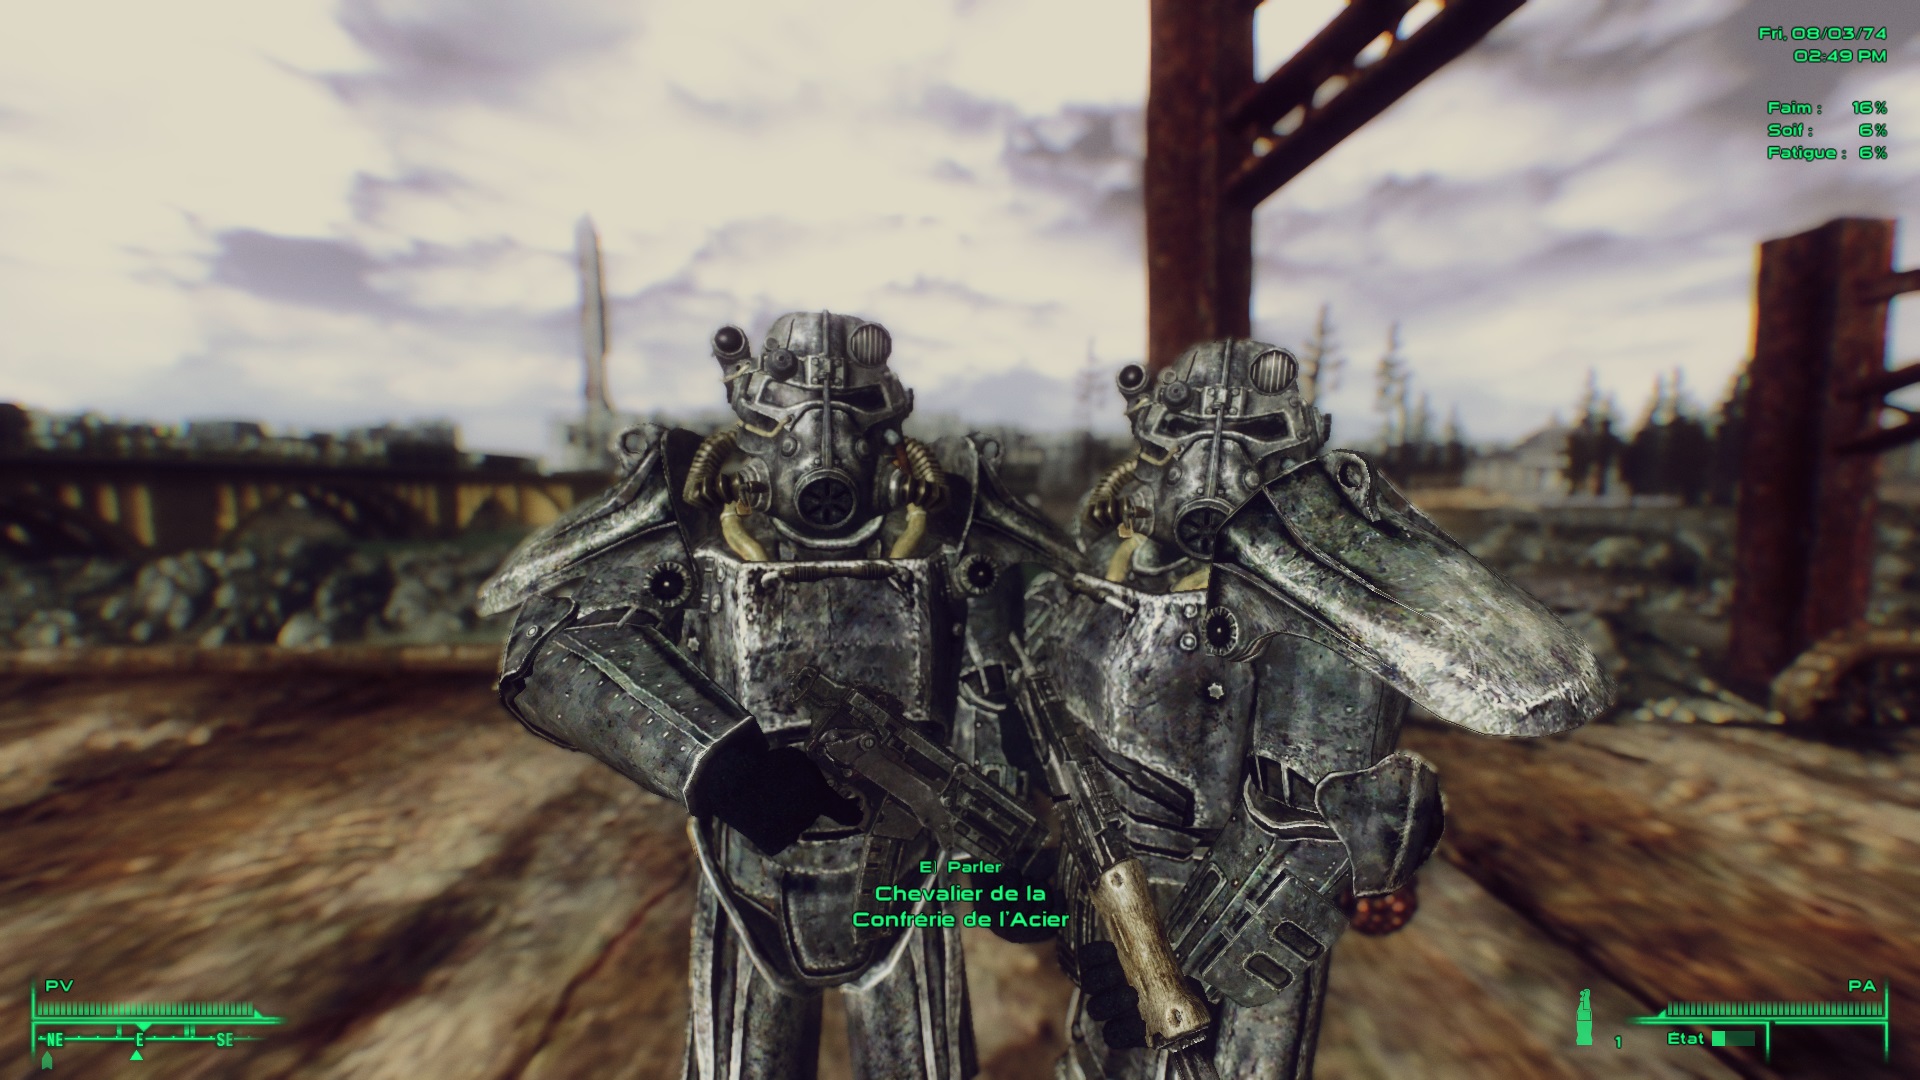 Fallout 3 remastered: console mods and creation club?